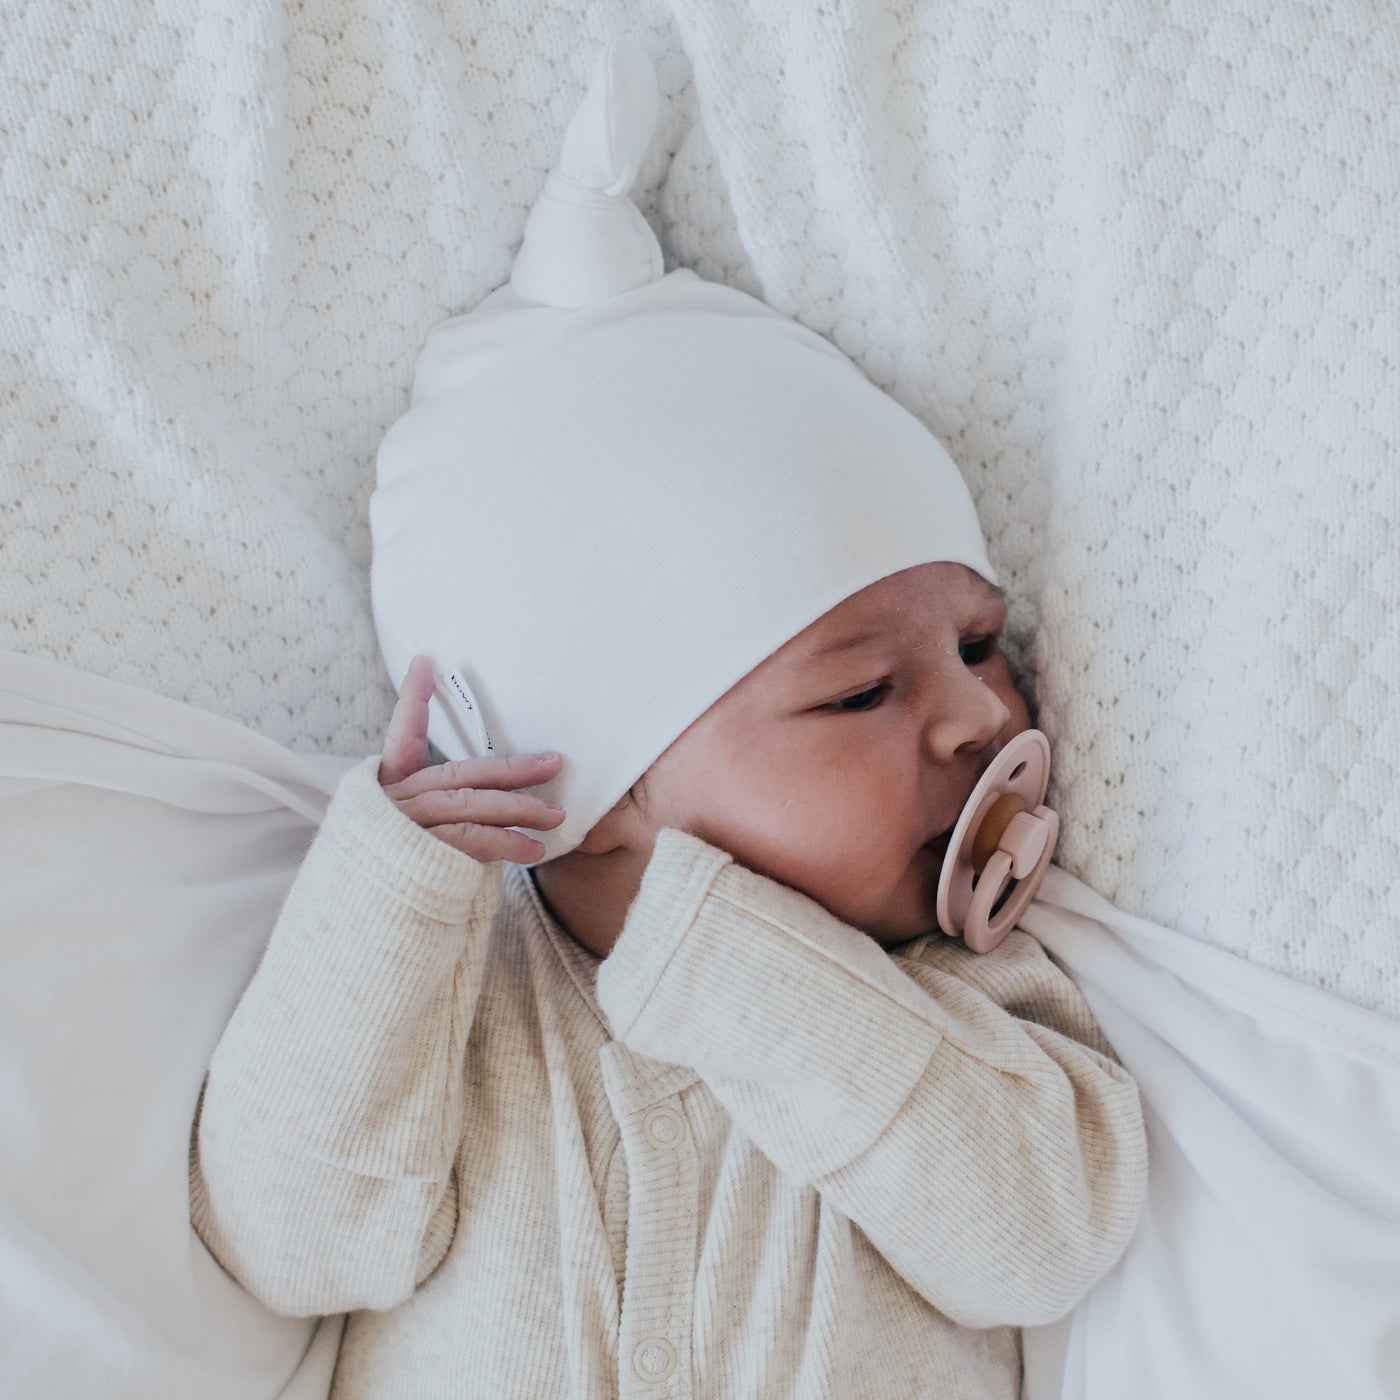 Baby dressed in white wearing white top knot beanie